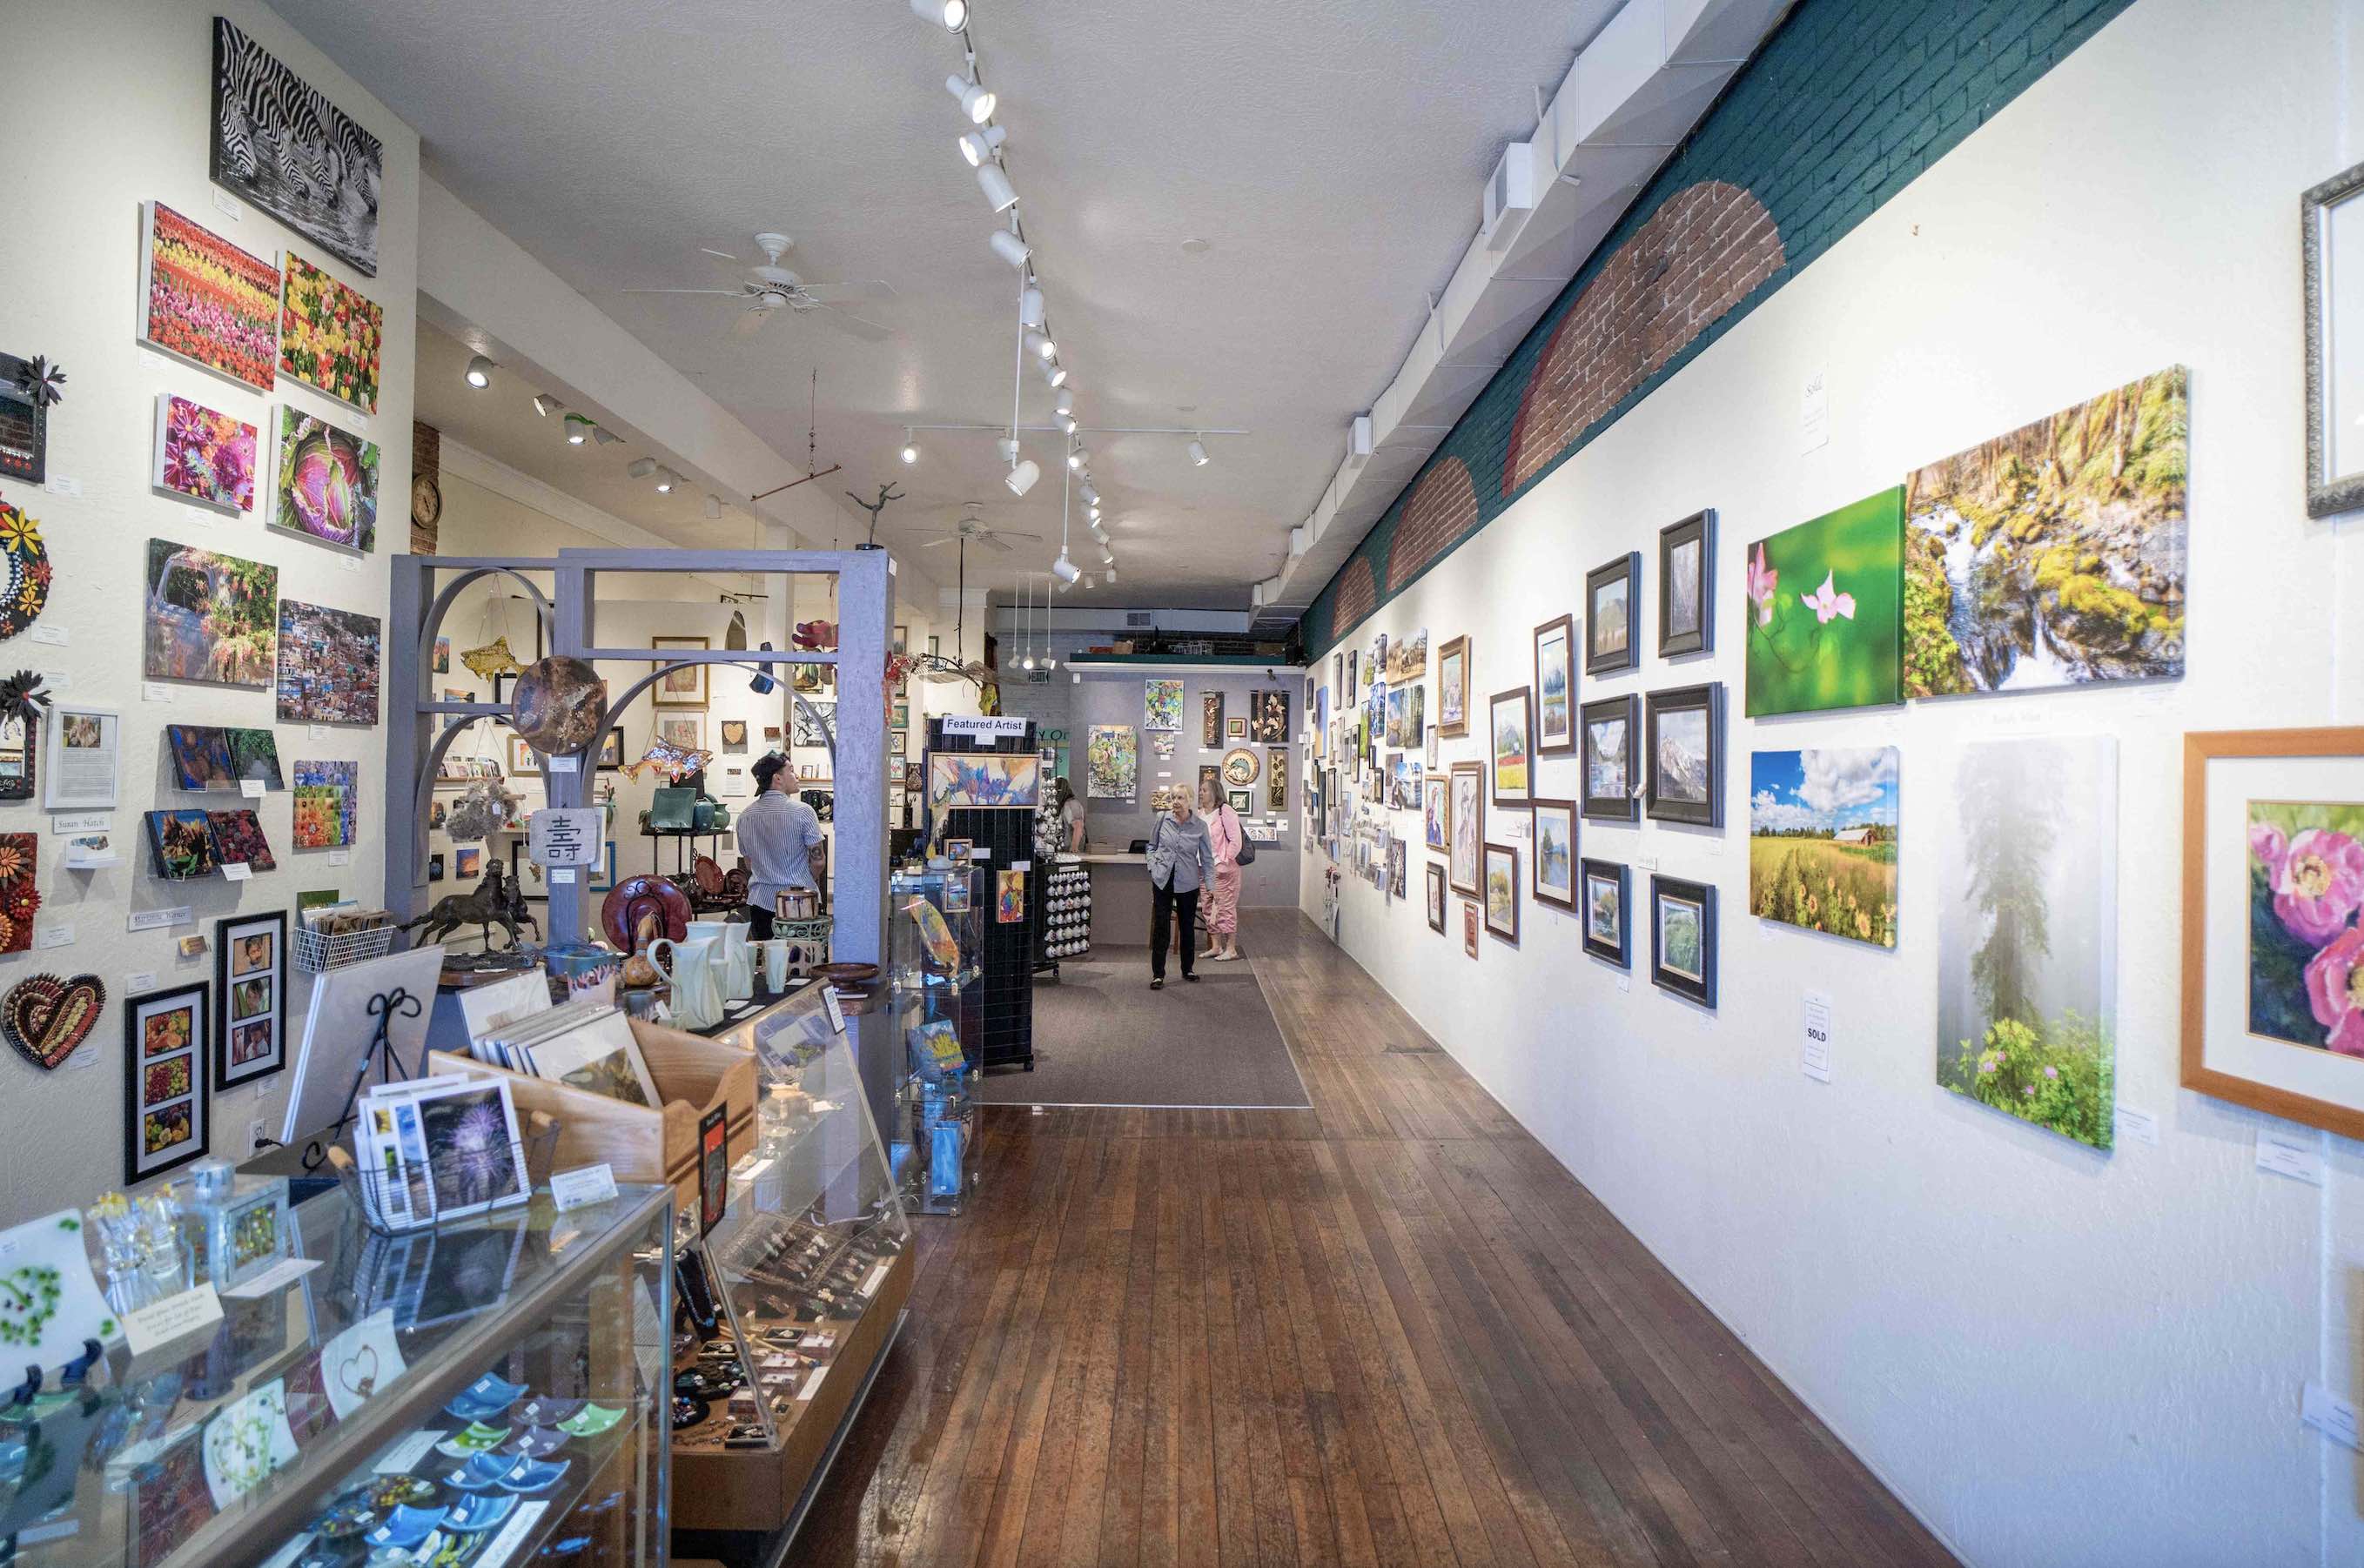 Grants Pass Museum of Art, Gallery One shop, full of vibrant art covering the walls.